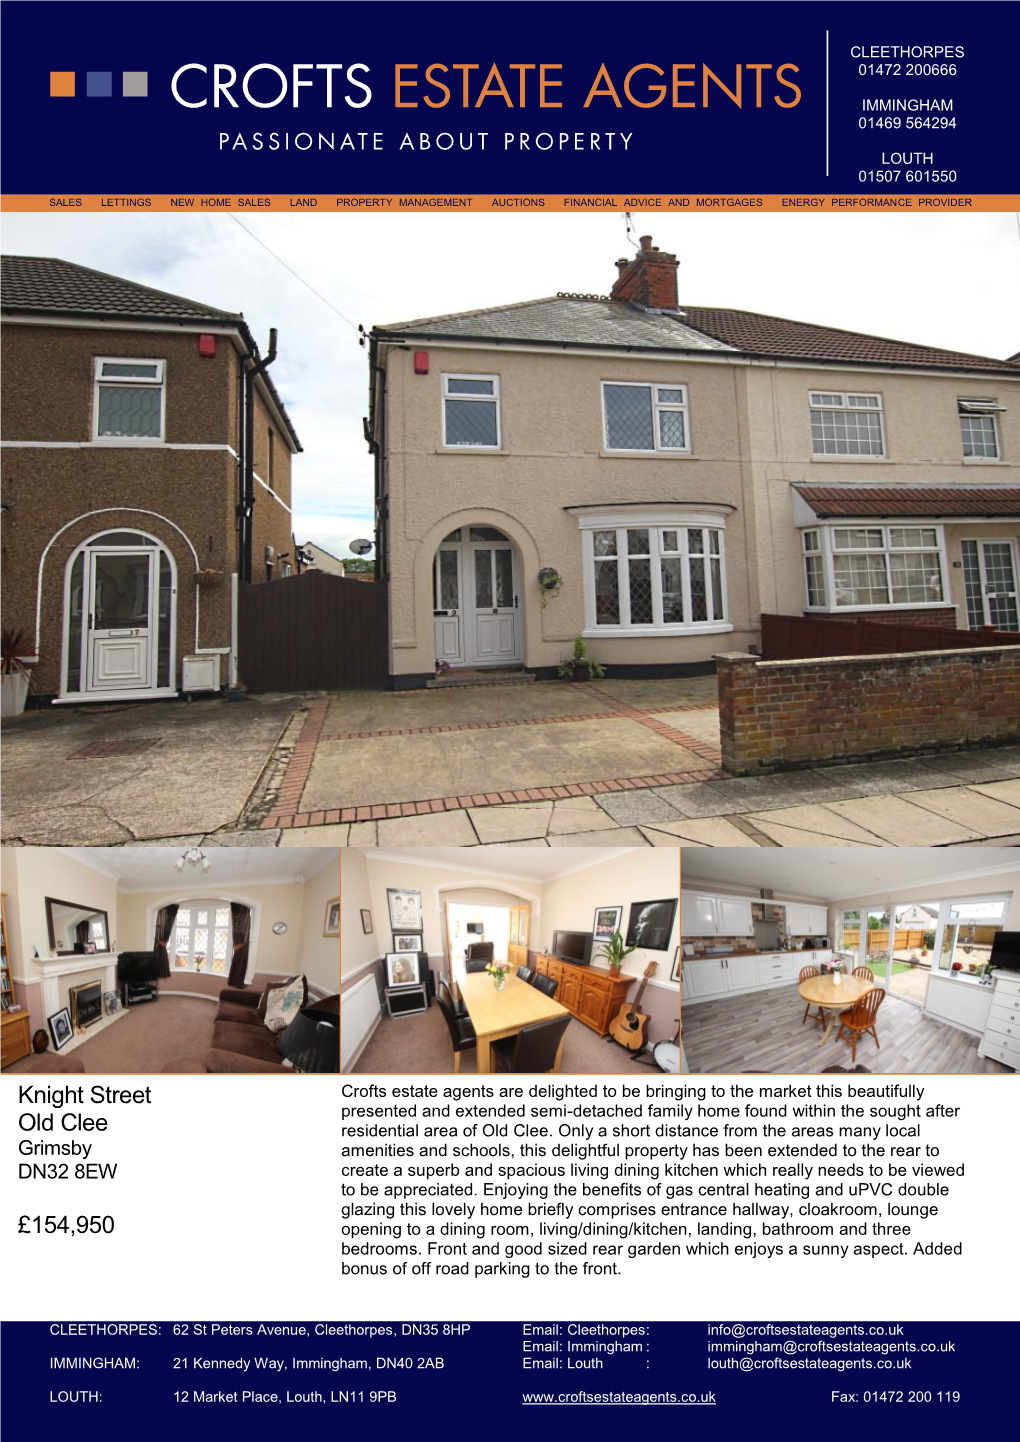 Knight Street Old Clee £154,950